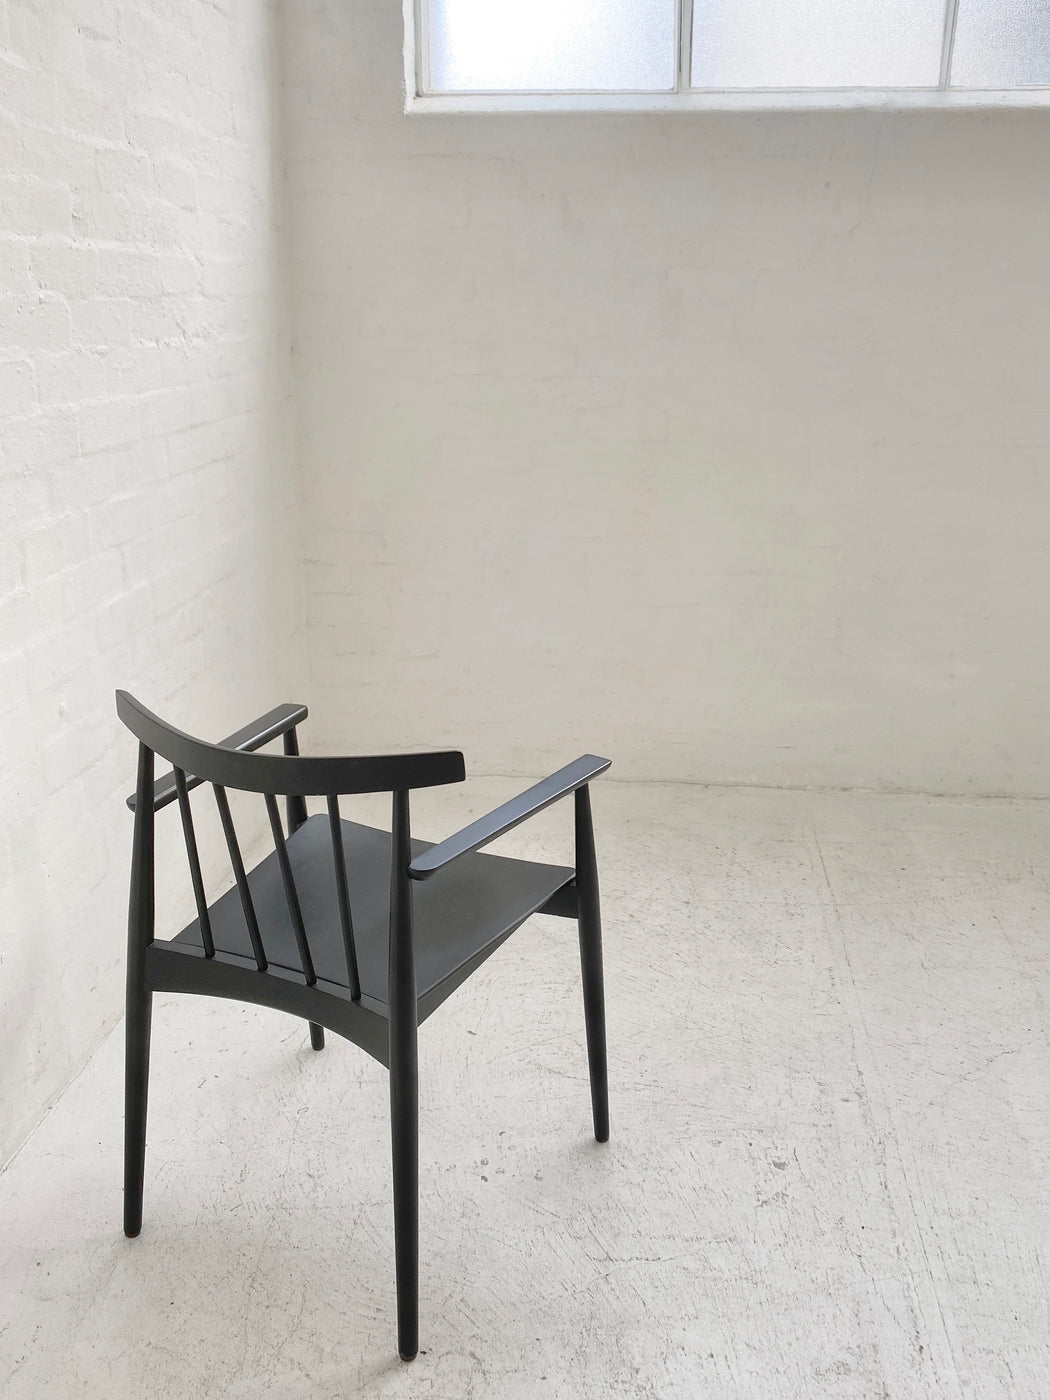 Lievore Altherr Molina ‘Smile’ Chair